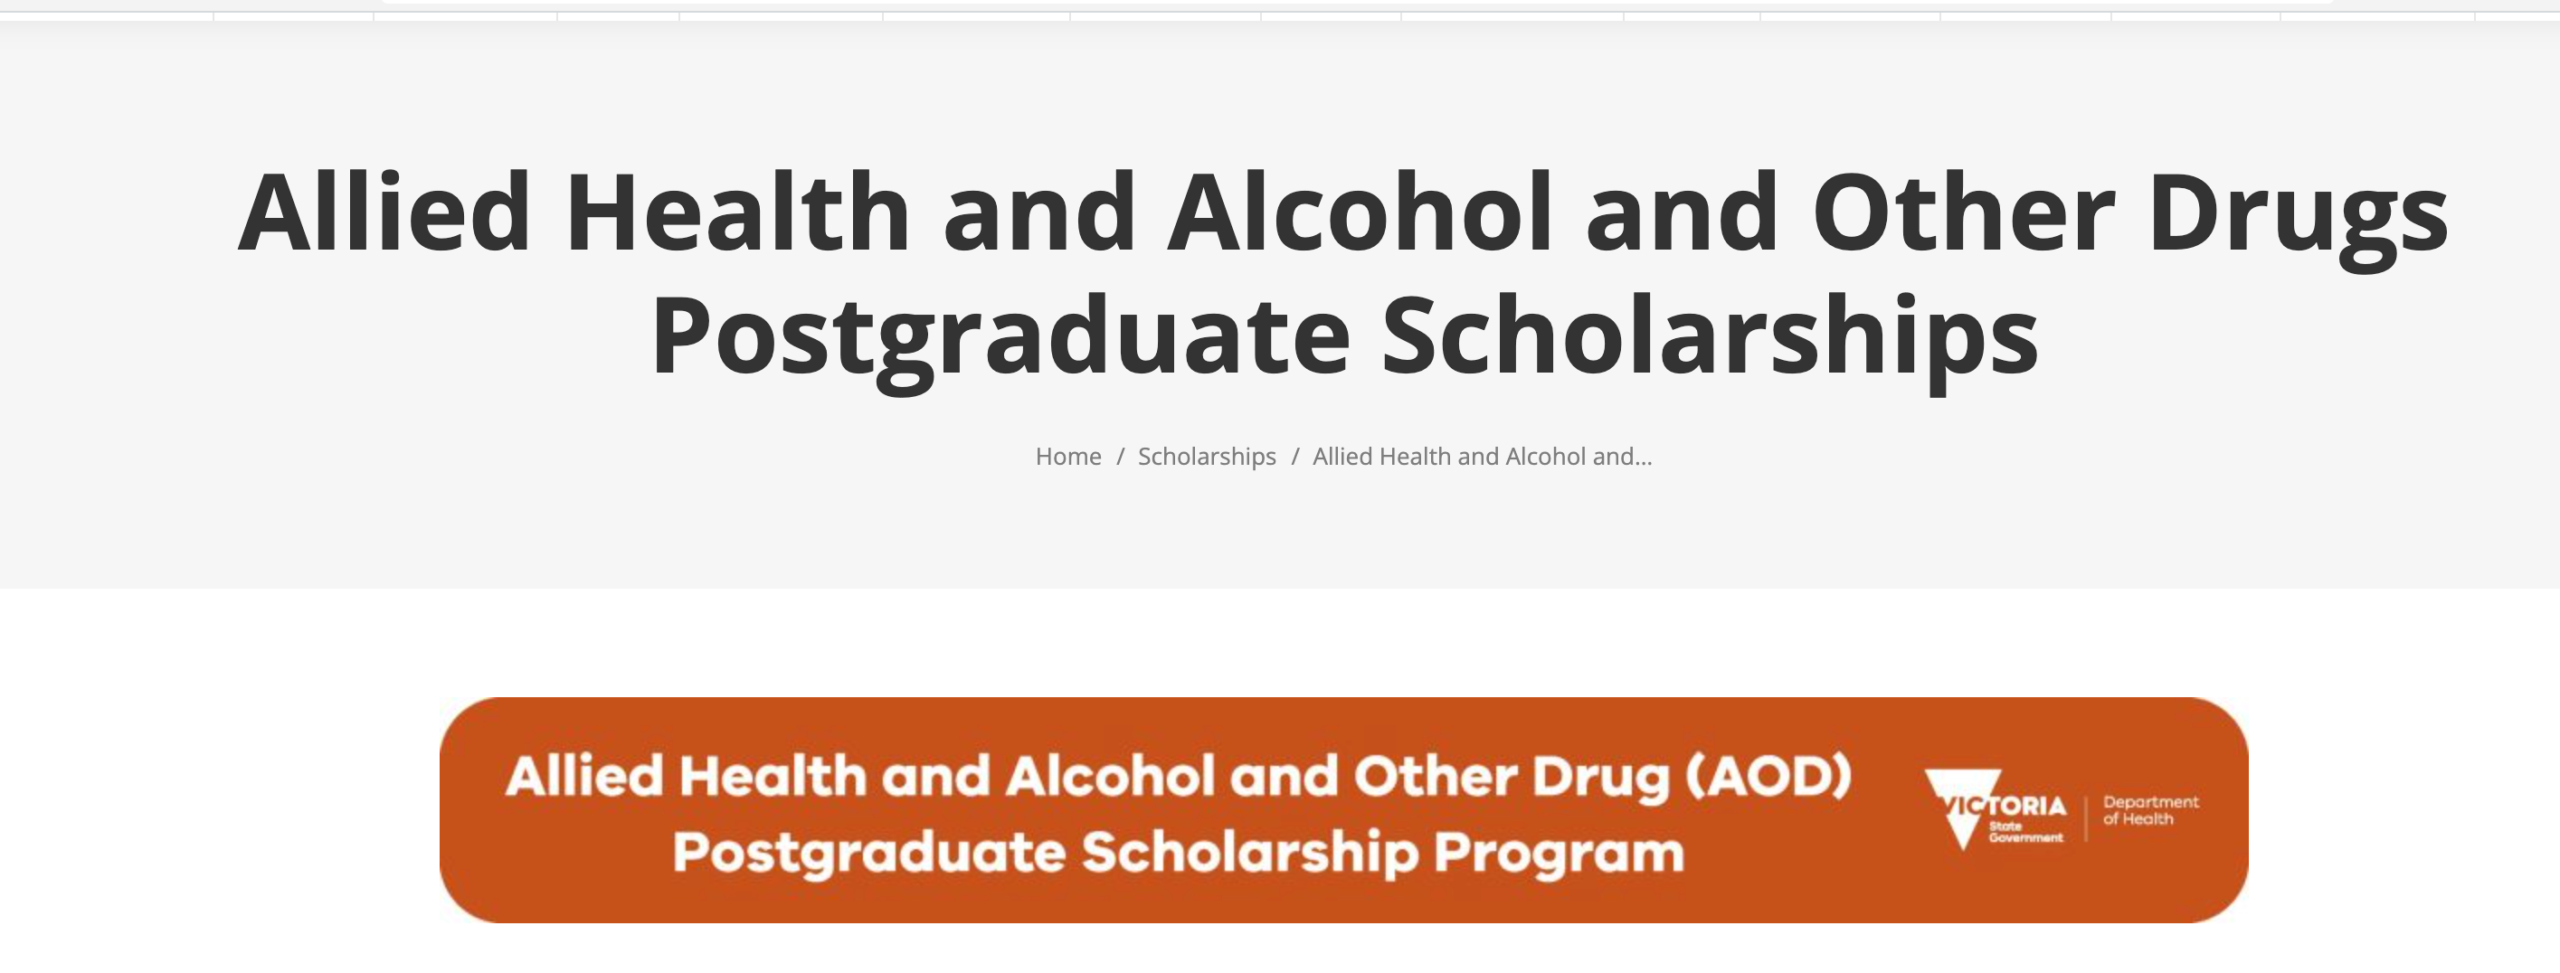 Allied Health and Alcohol and Other Drugs Postgraduate Scholarships